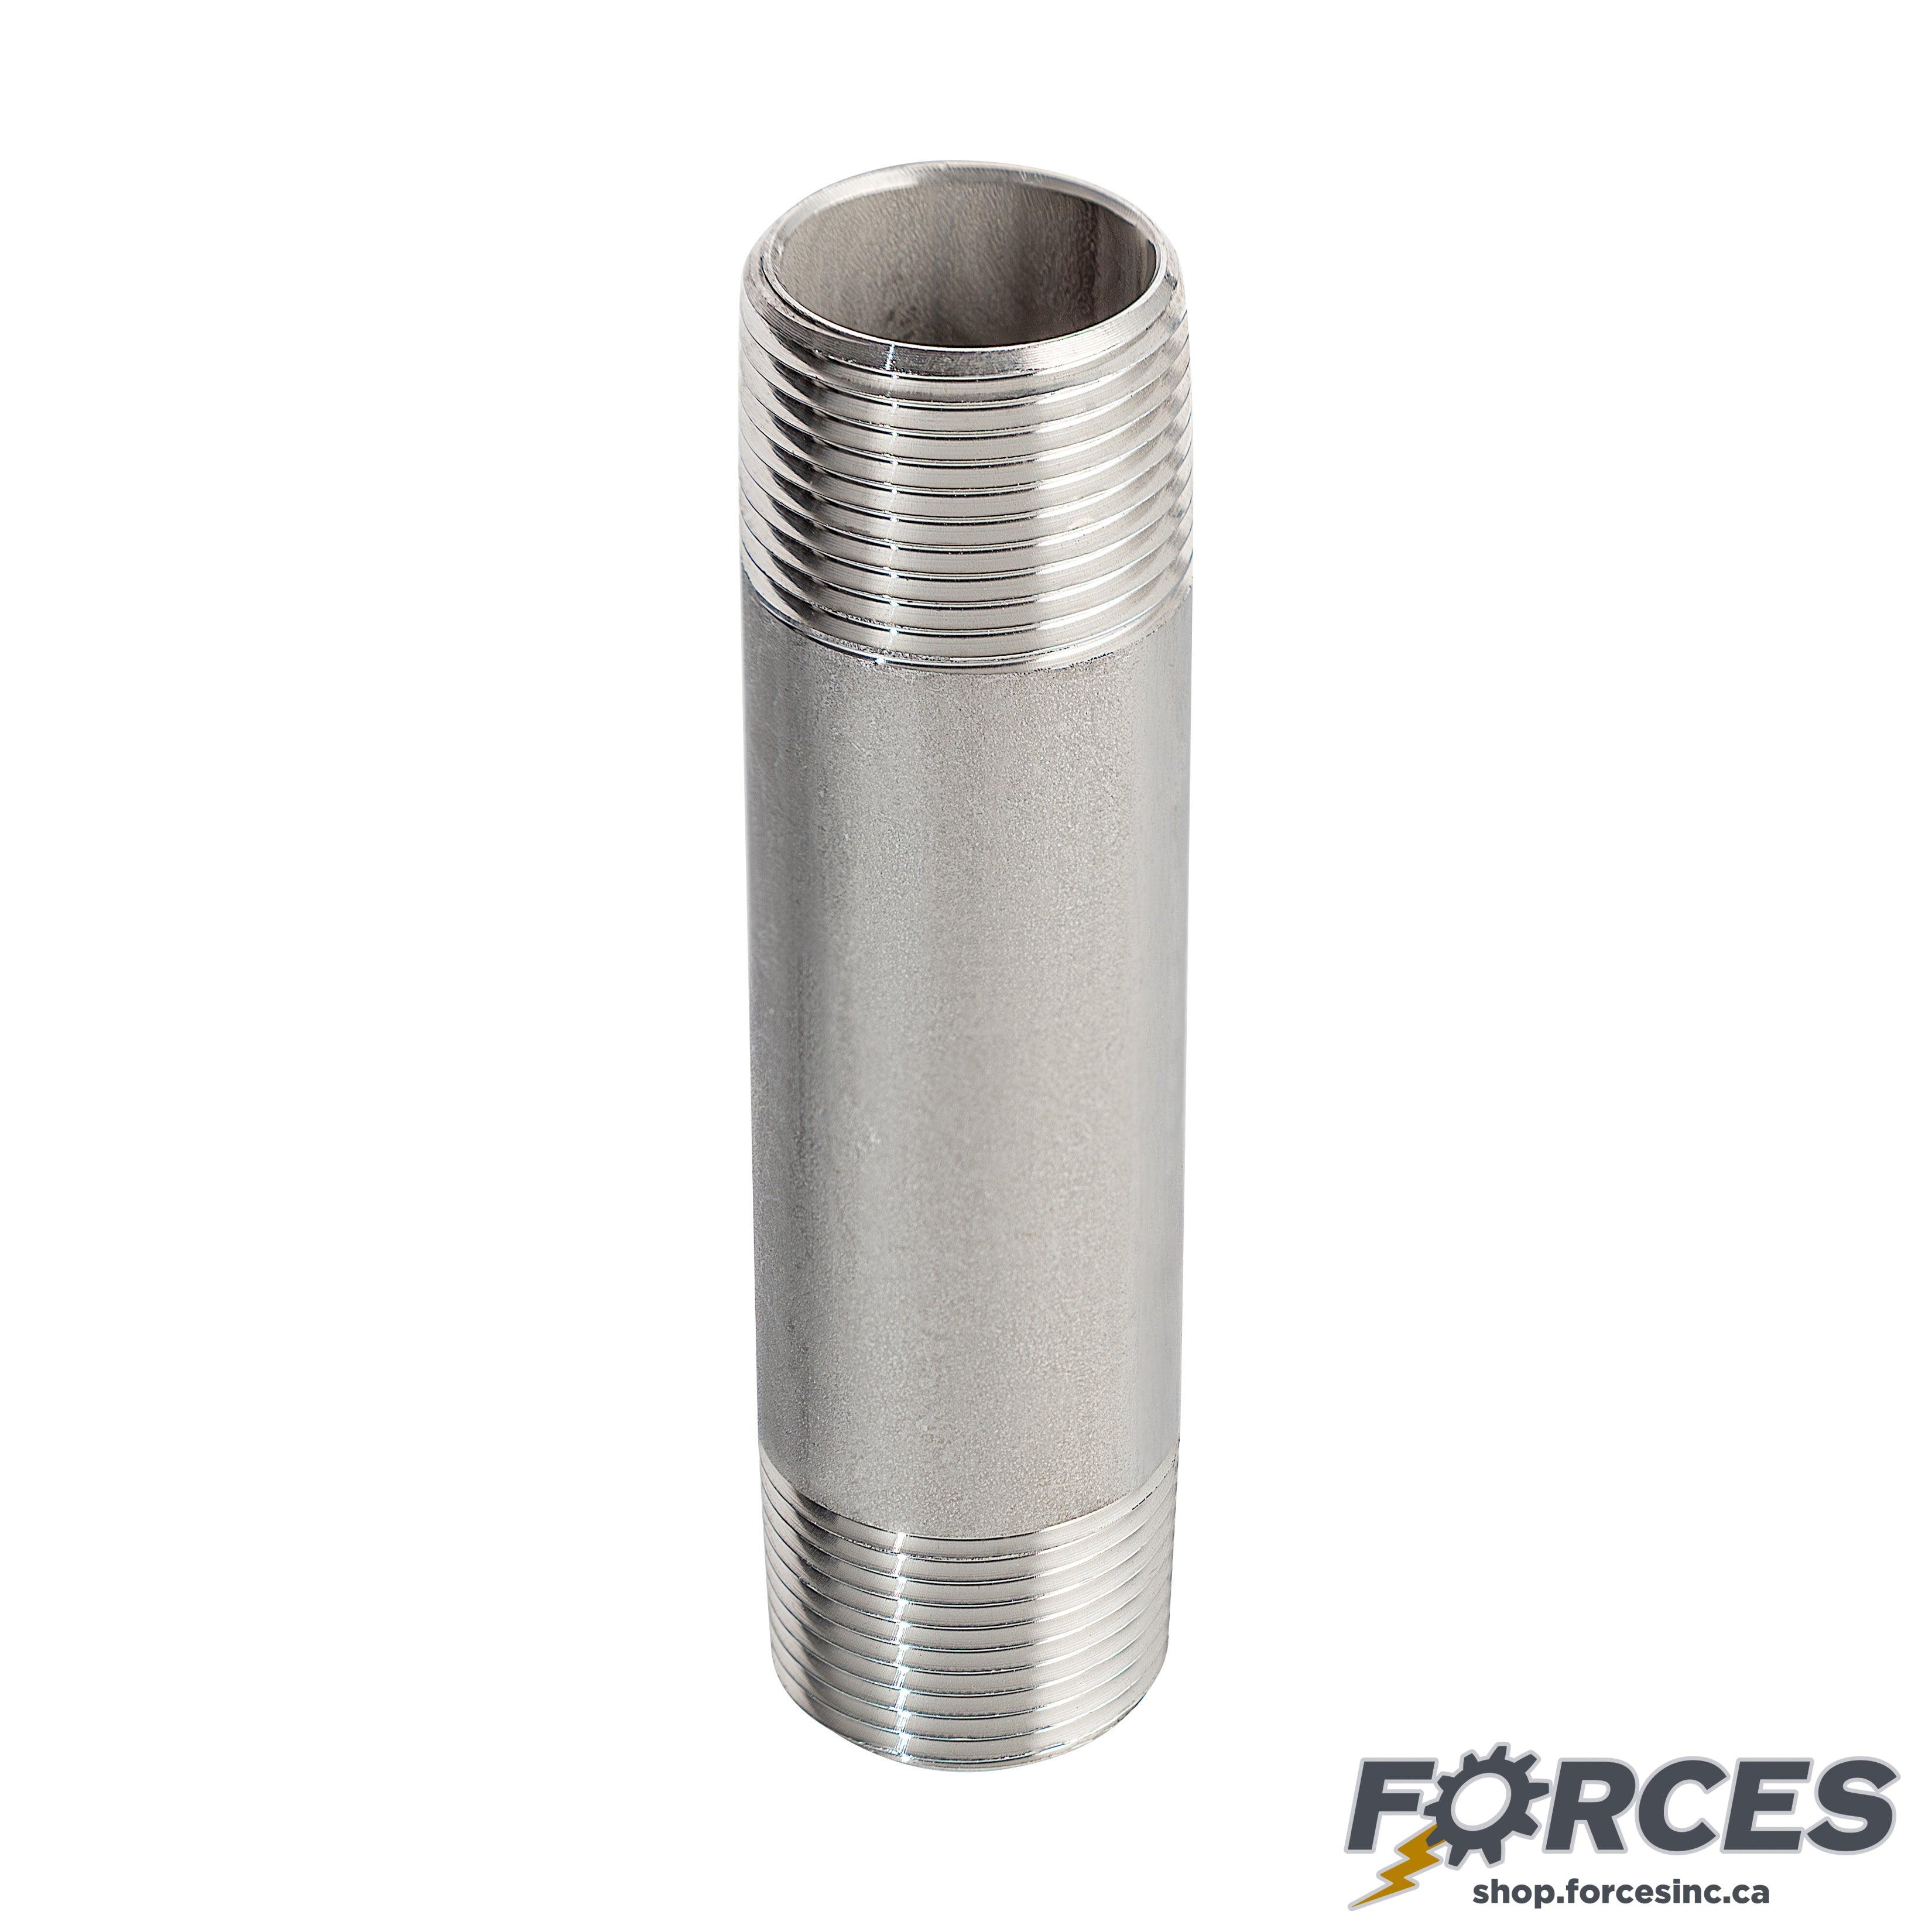 2" X 6" Long Nipple - Stainless Steel 316 - Forces Inc